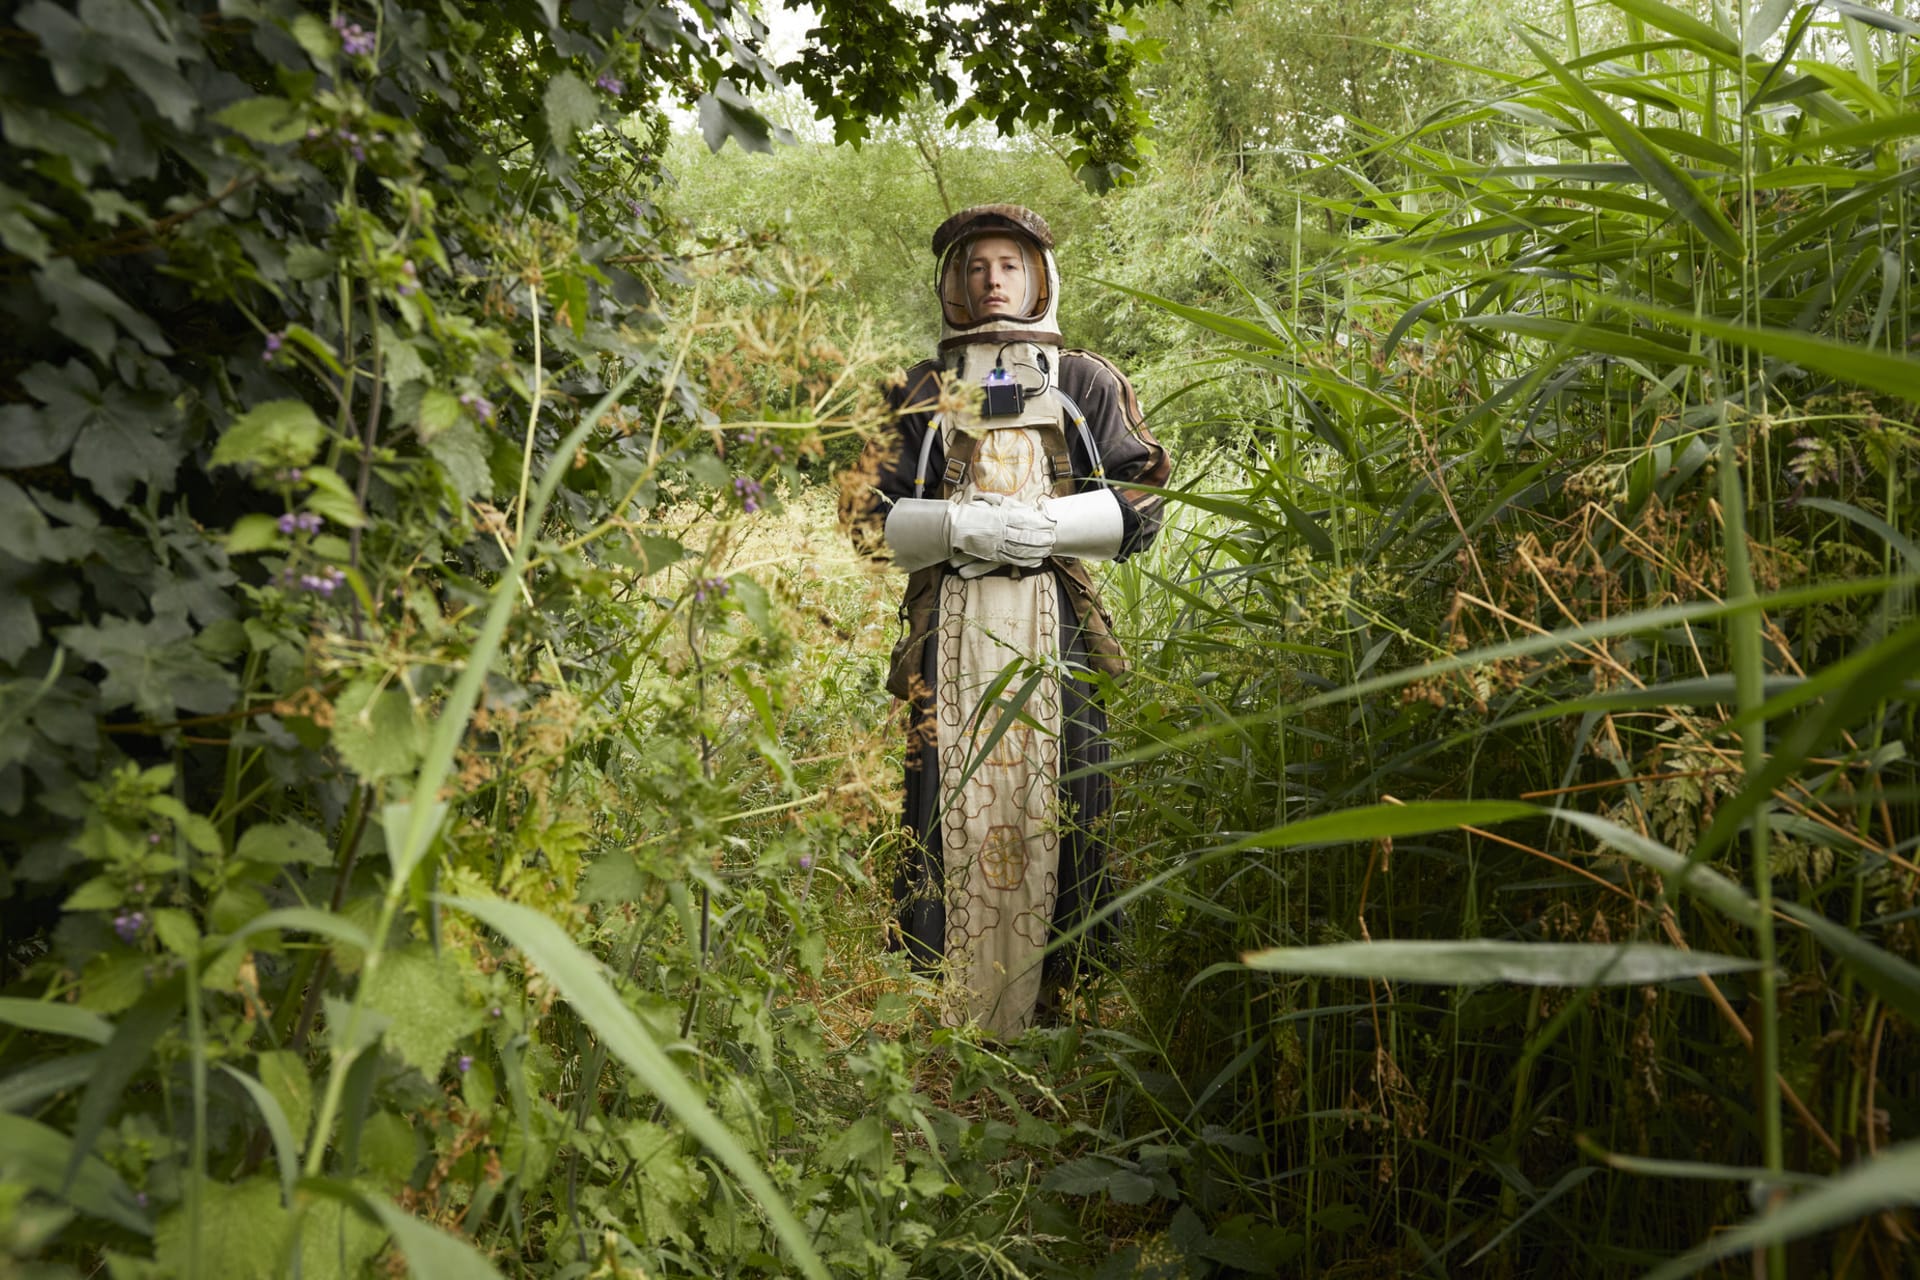 A person dressed in a costume resembling a medieval monk astronaut. They are surrounded by dense foliage.